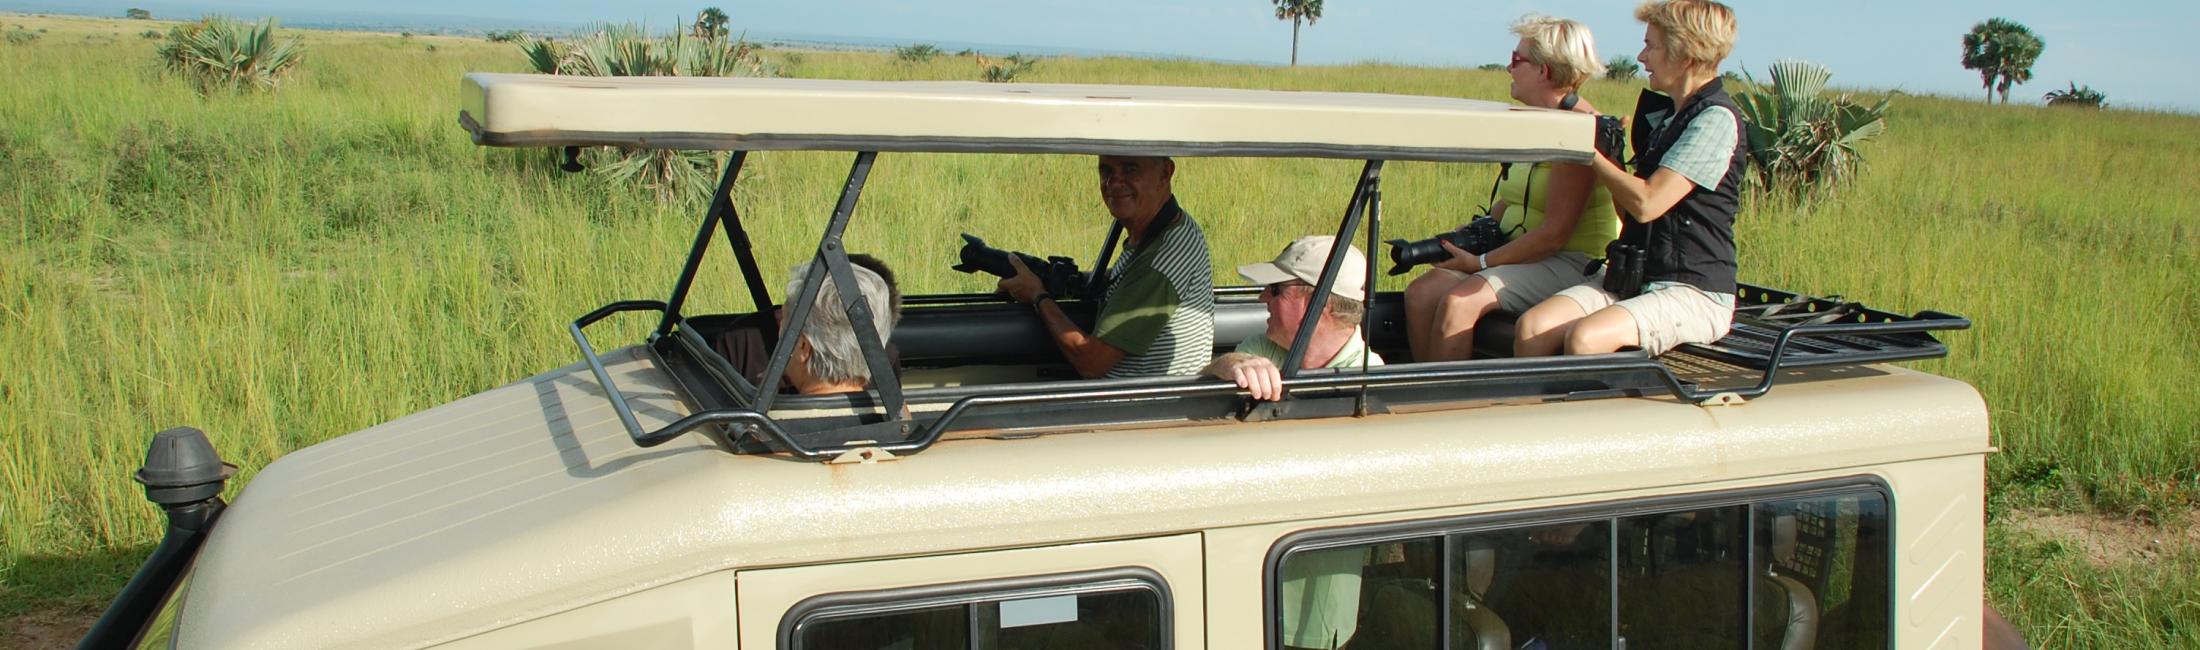 Tourist in safari vehicle with open roof and large windows